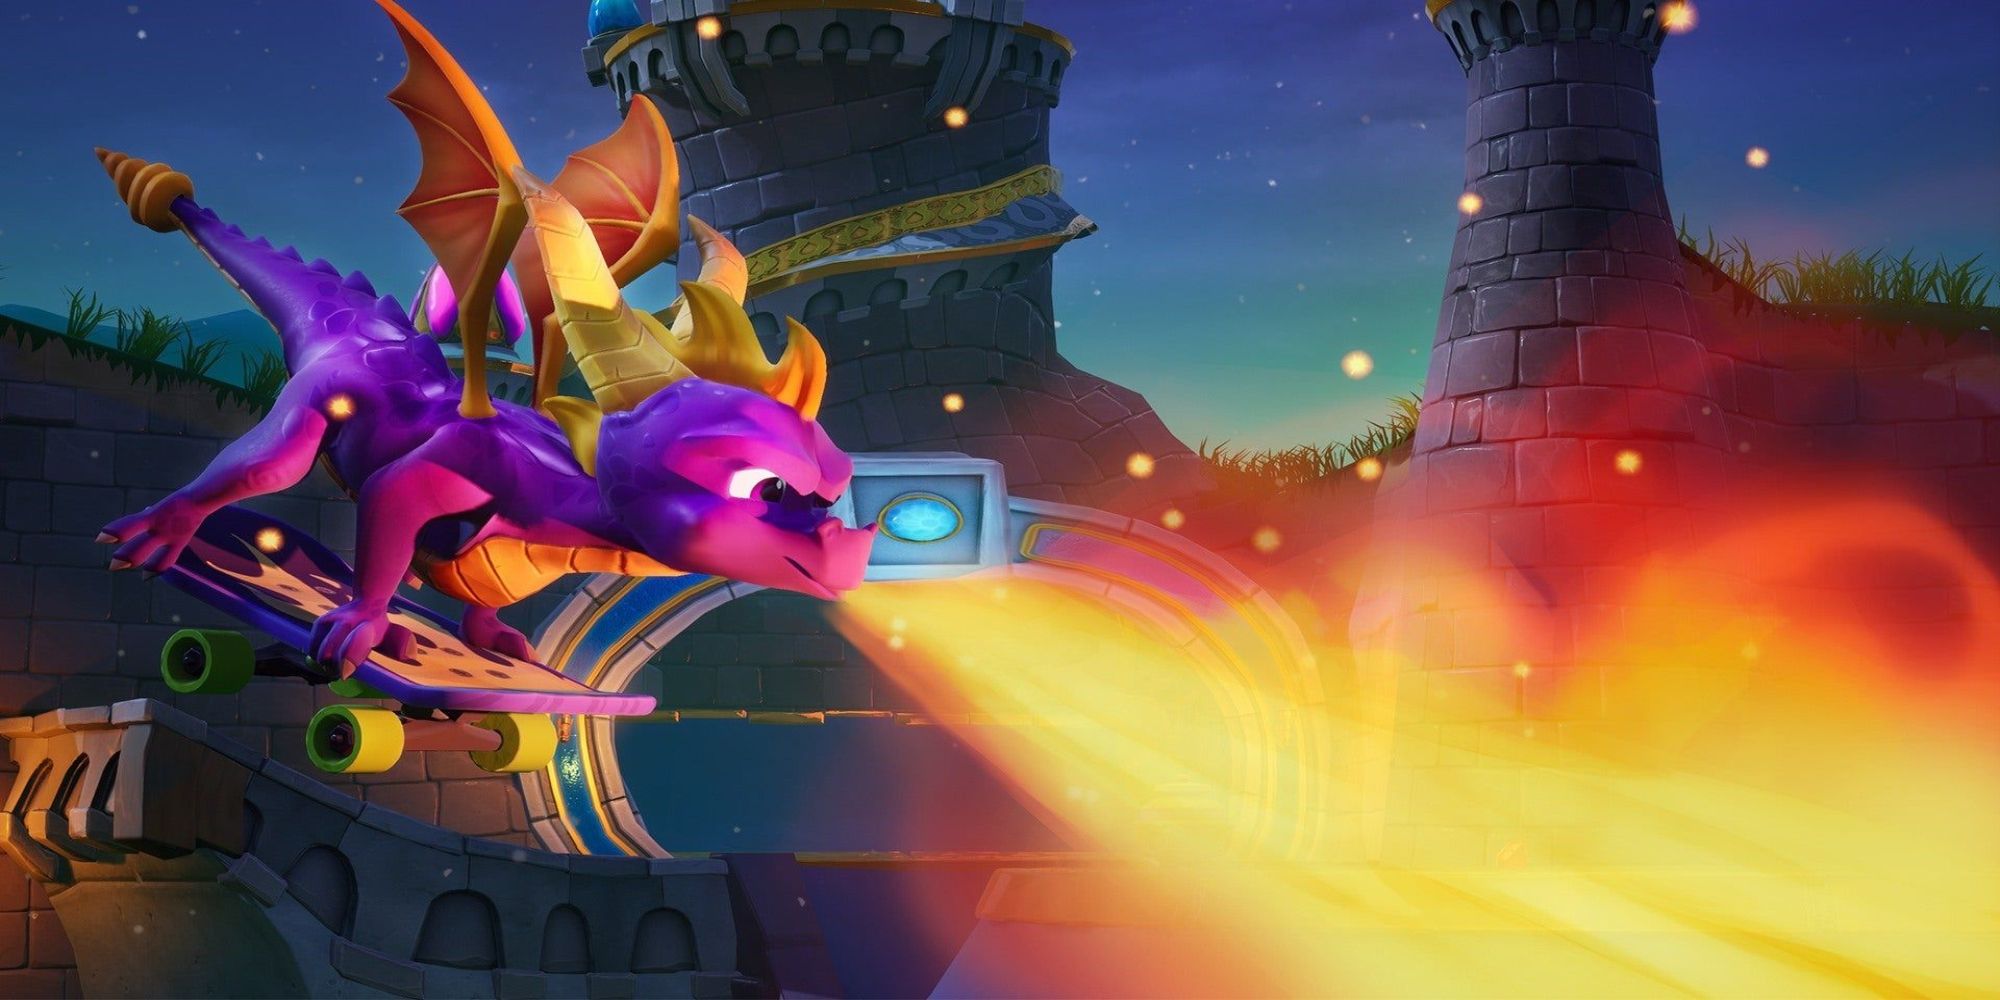 spyro year of the dragon, spyro breathing fire while riding a skateboard